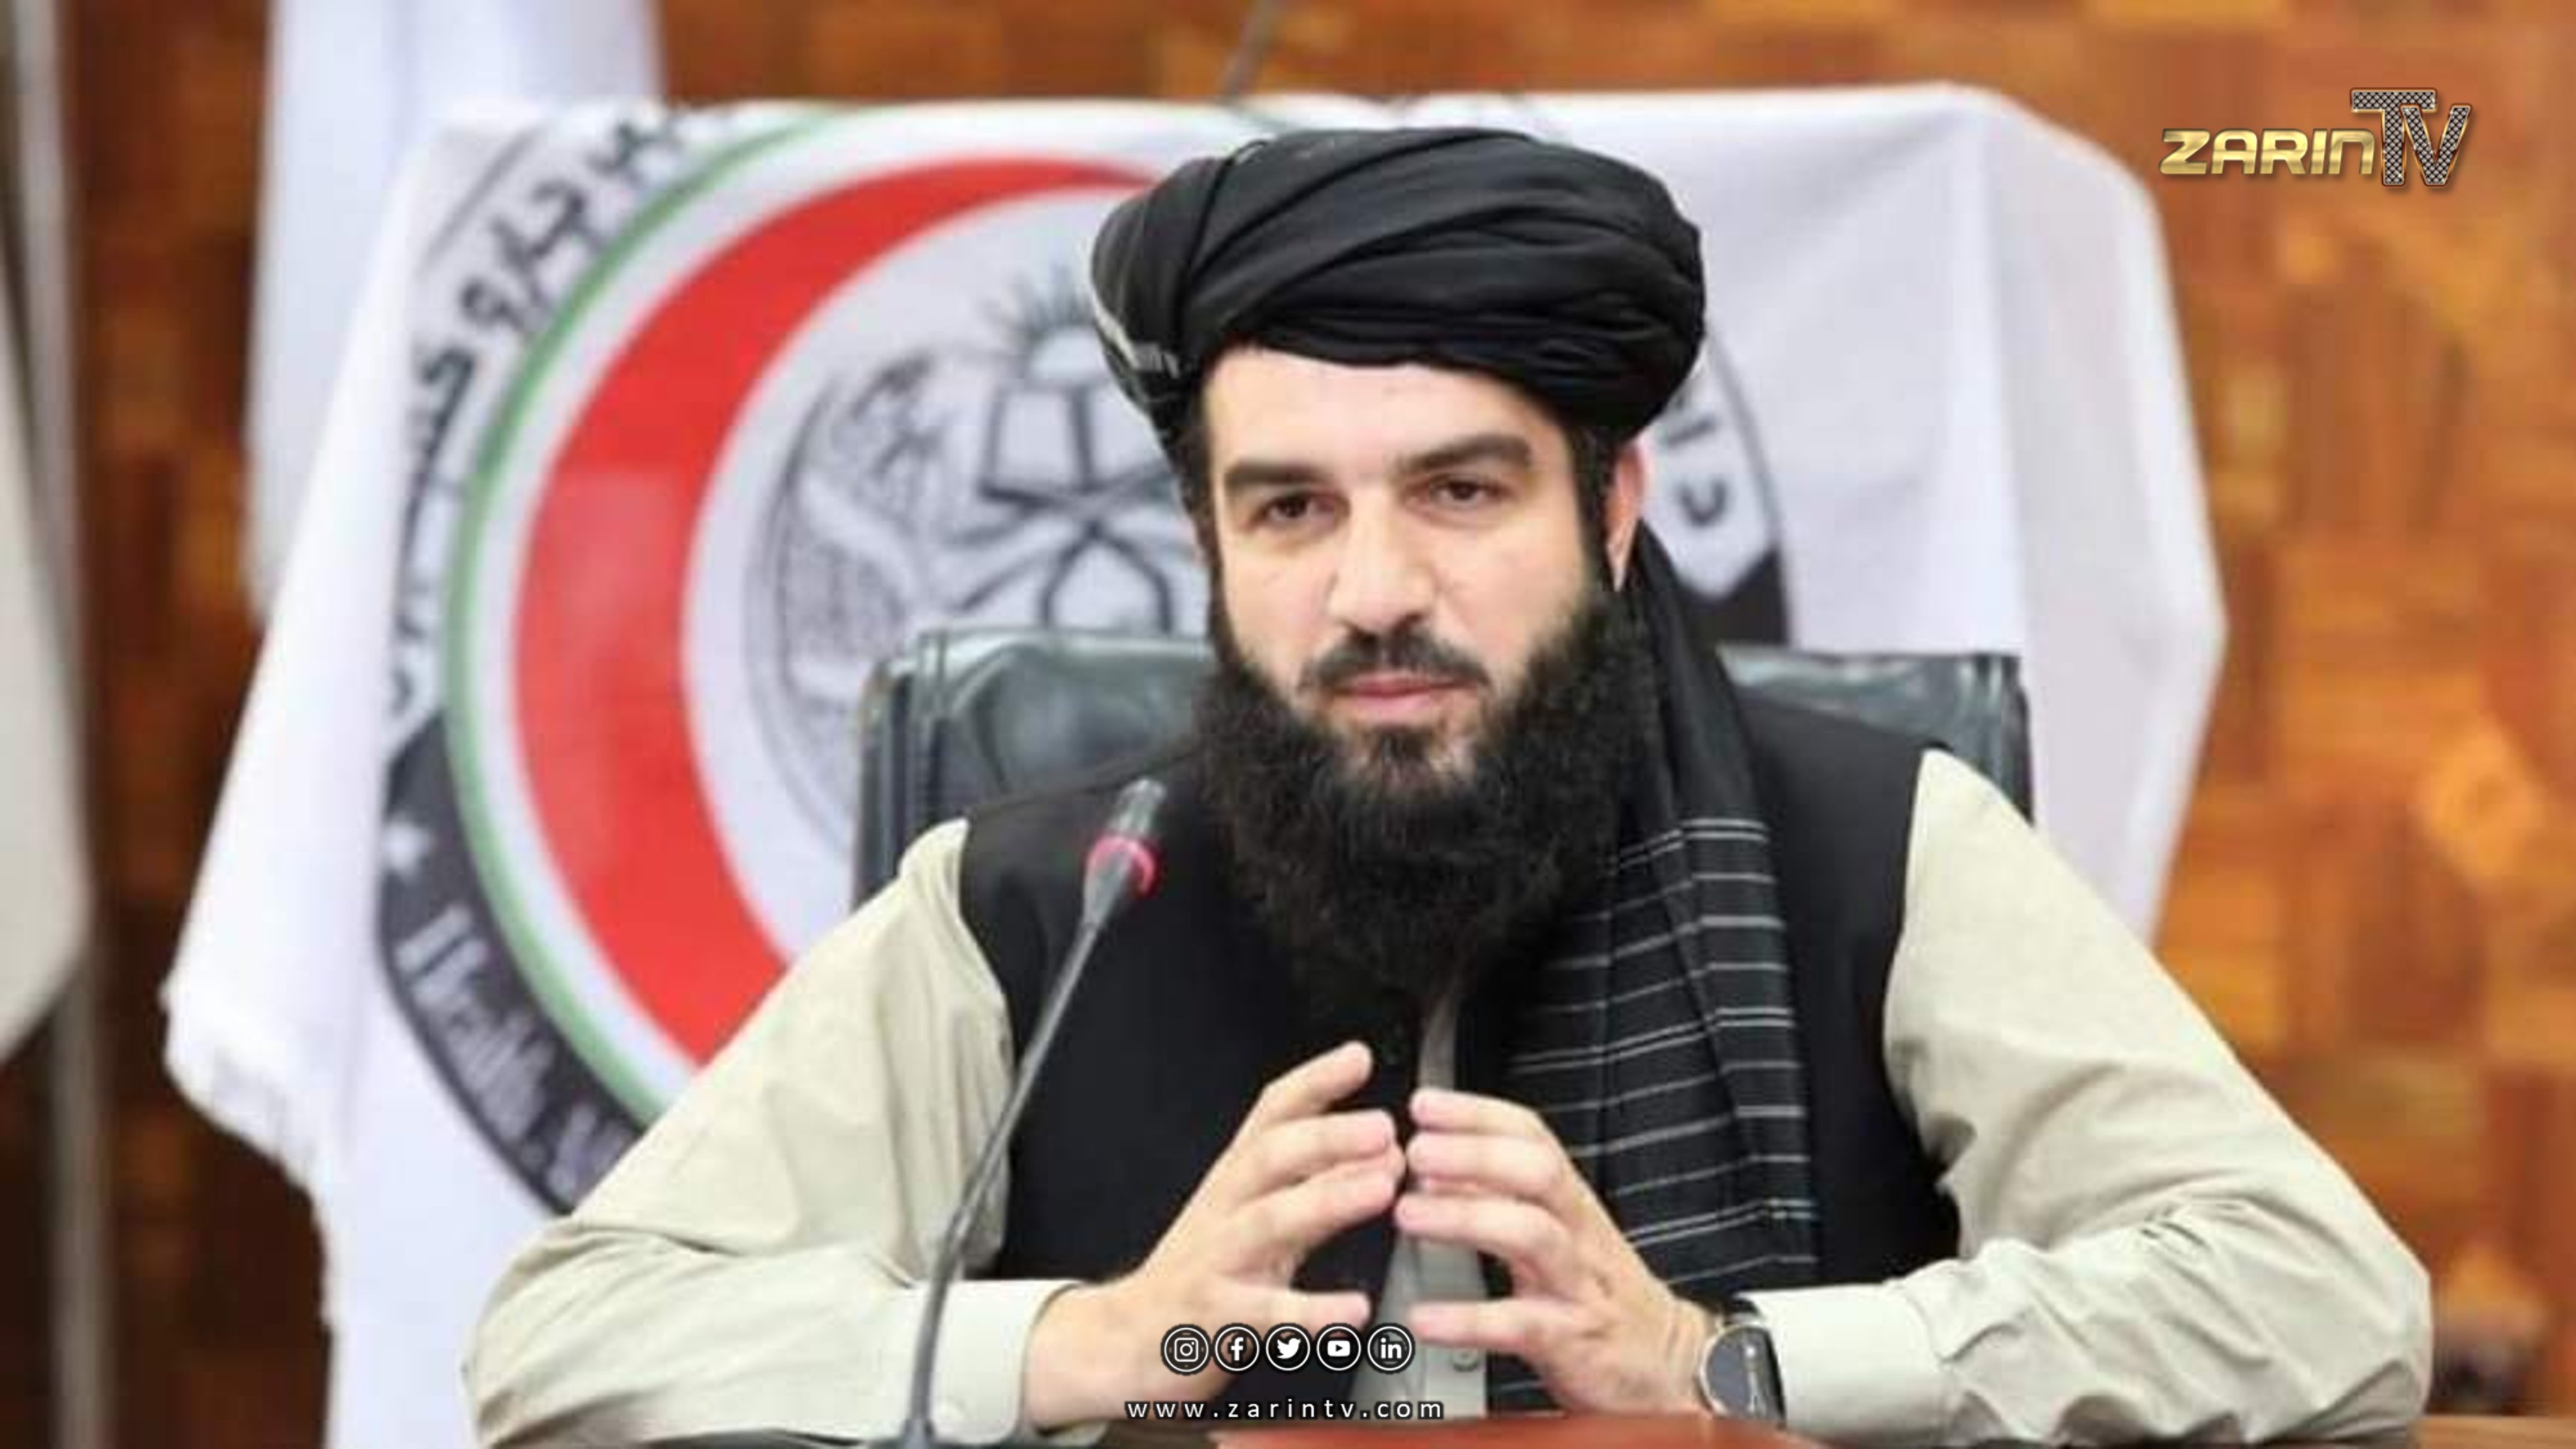 Taliban Minister of Public Health: Half of the people in remote areas do not have access to health services